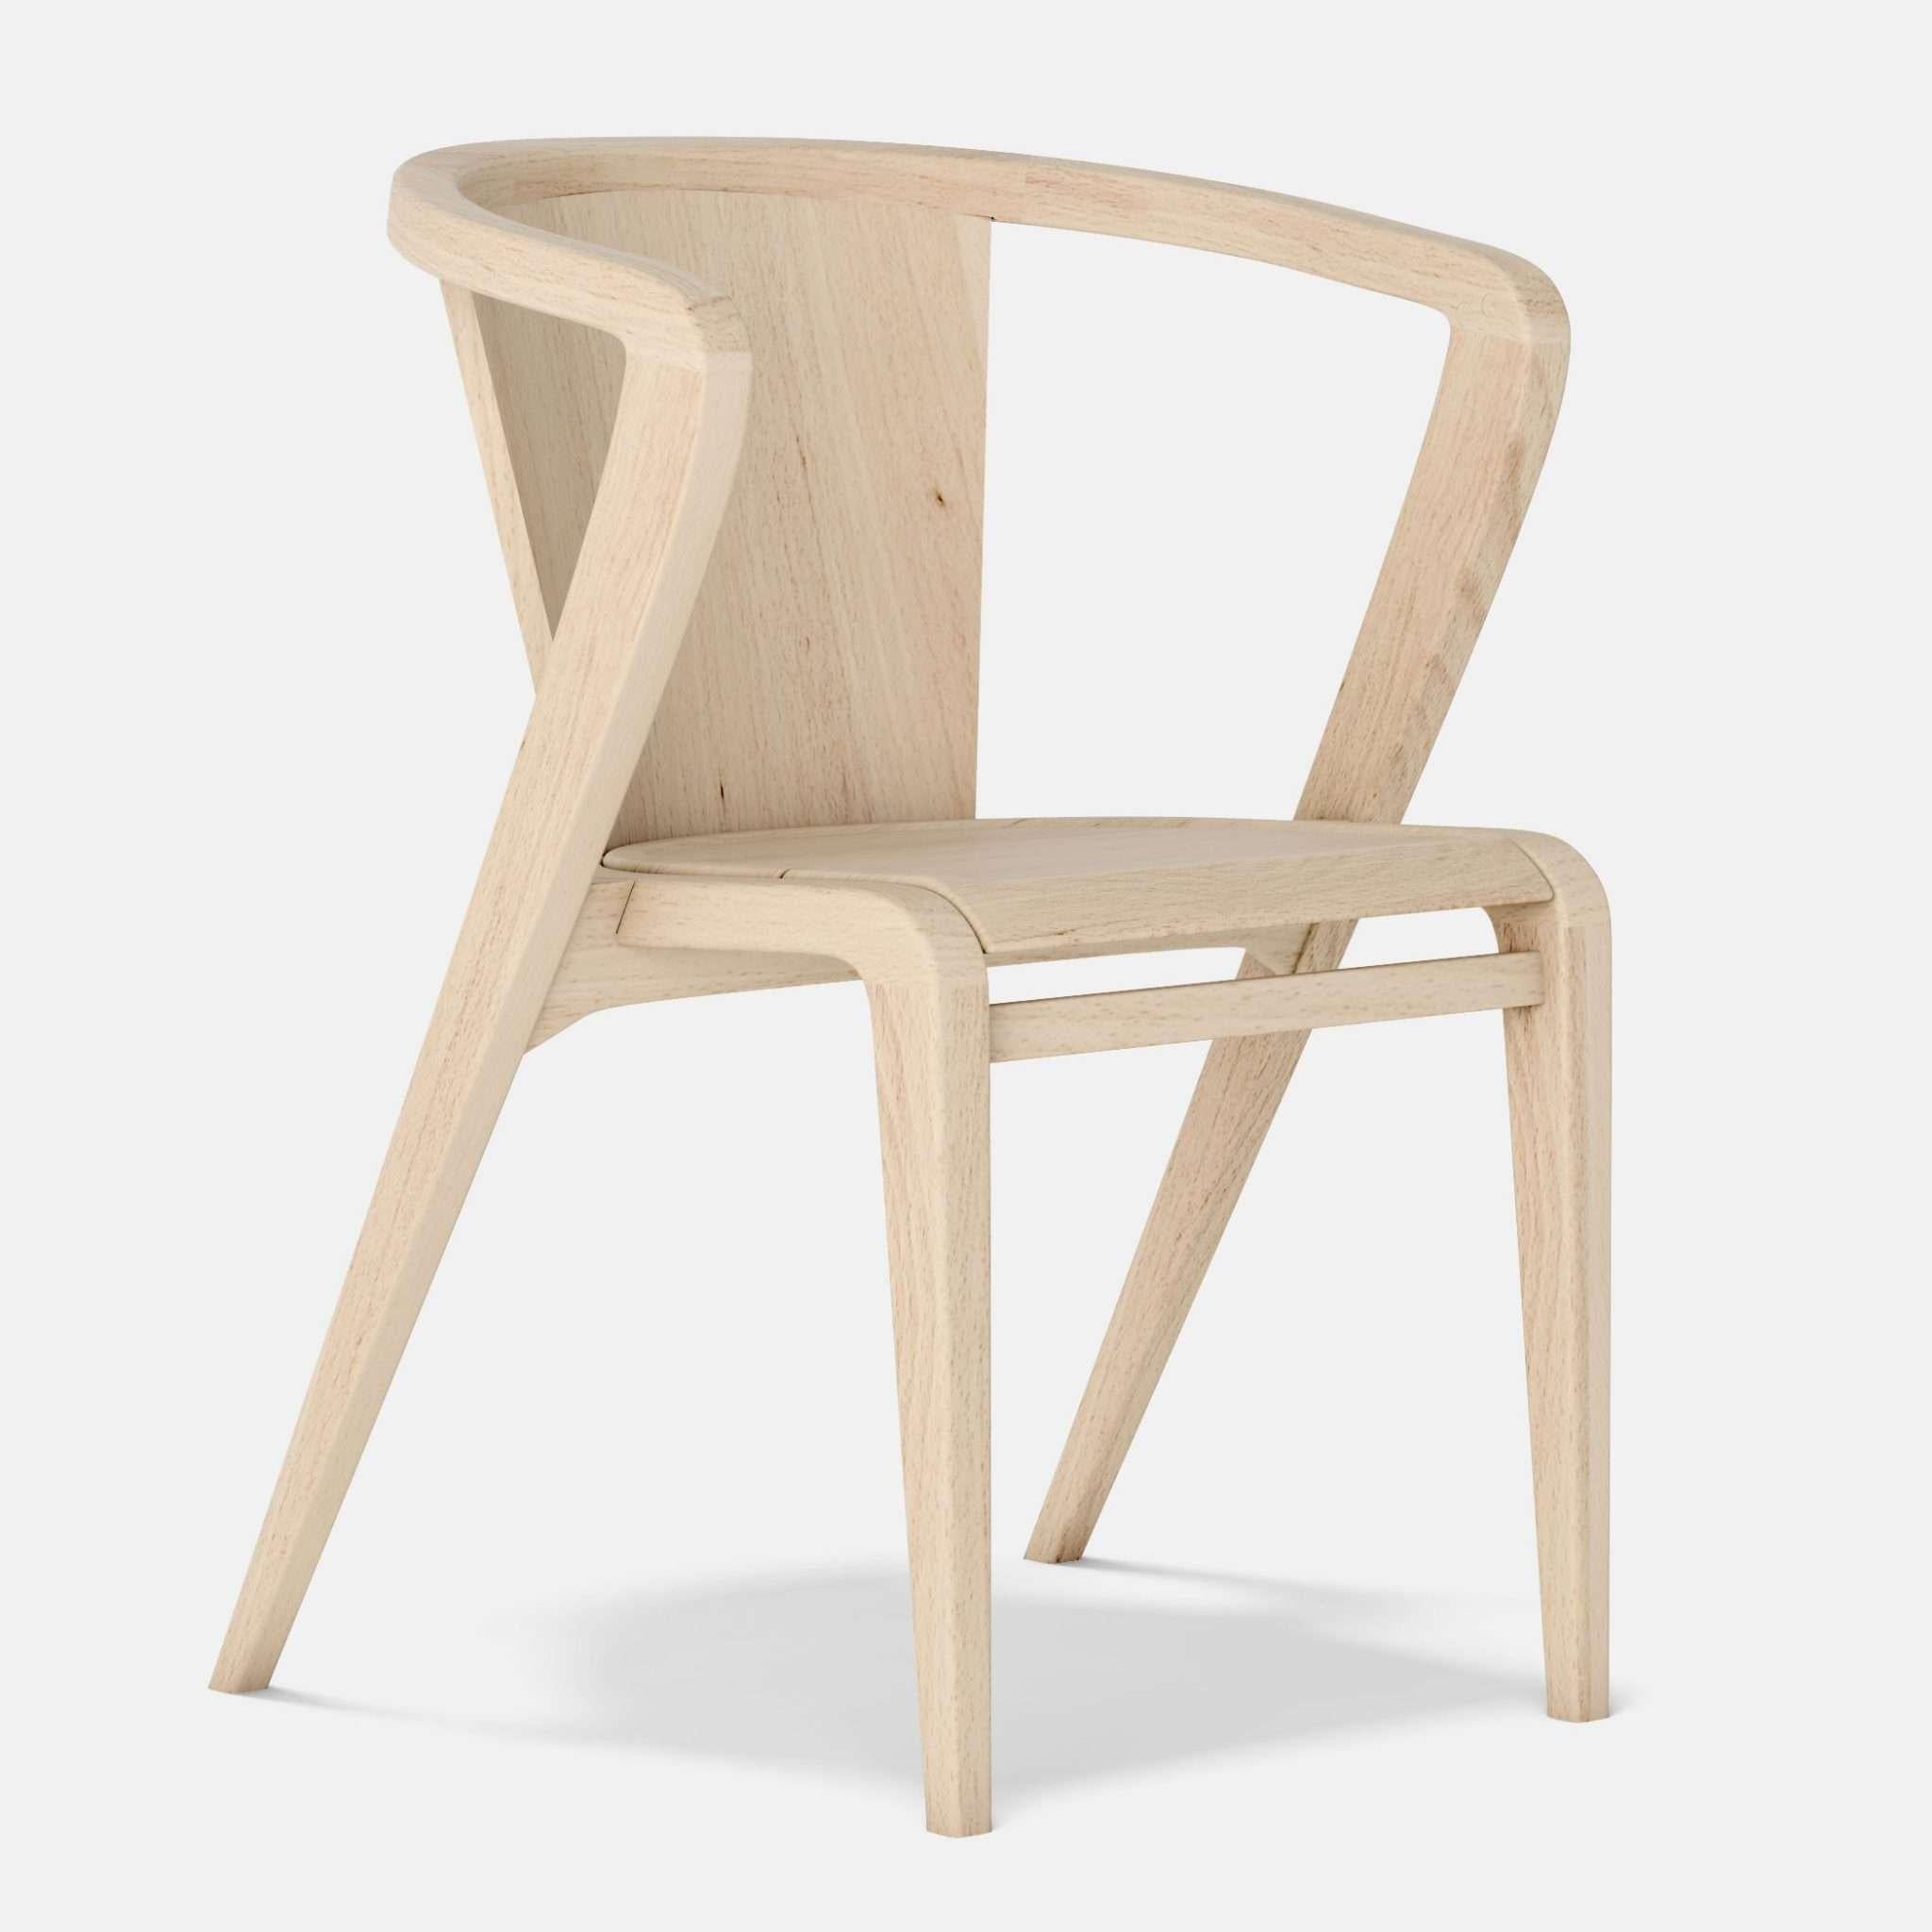 Ash Portuguese roots chair by Alexandre Caldas
Dimensions: W 40 x D 39 x H 73 cm
Materials: Ash

PORTUGUESE ROOTS Chair, was inspired by its original model from 1950, created by Gonçalo Rodrigues dos Santos and designed today by Alexandre Caldas. An